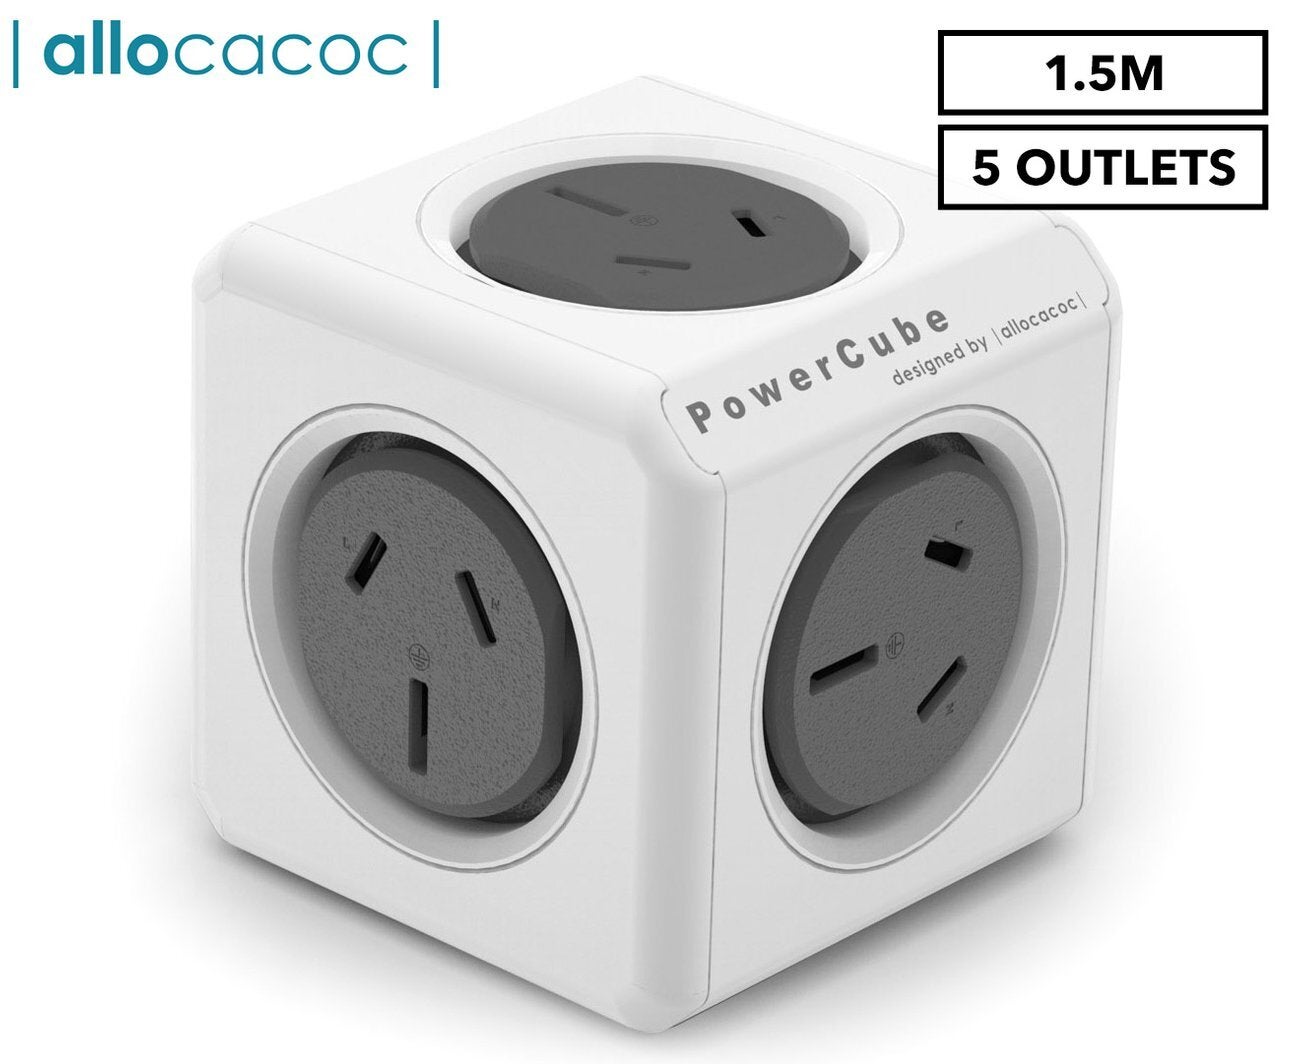 ALLOCACOC POWERCUBE Extended 5 Outlets, 1.5M - Grey